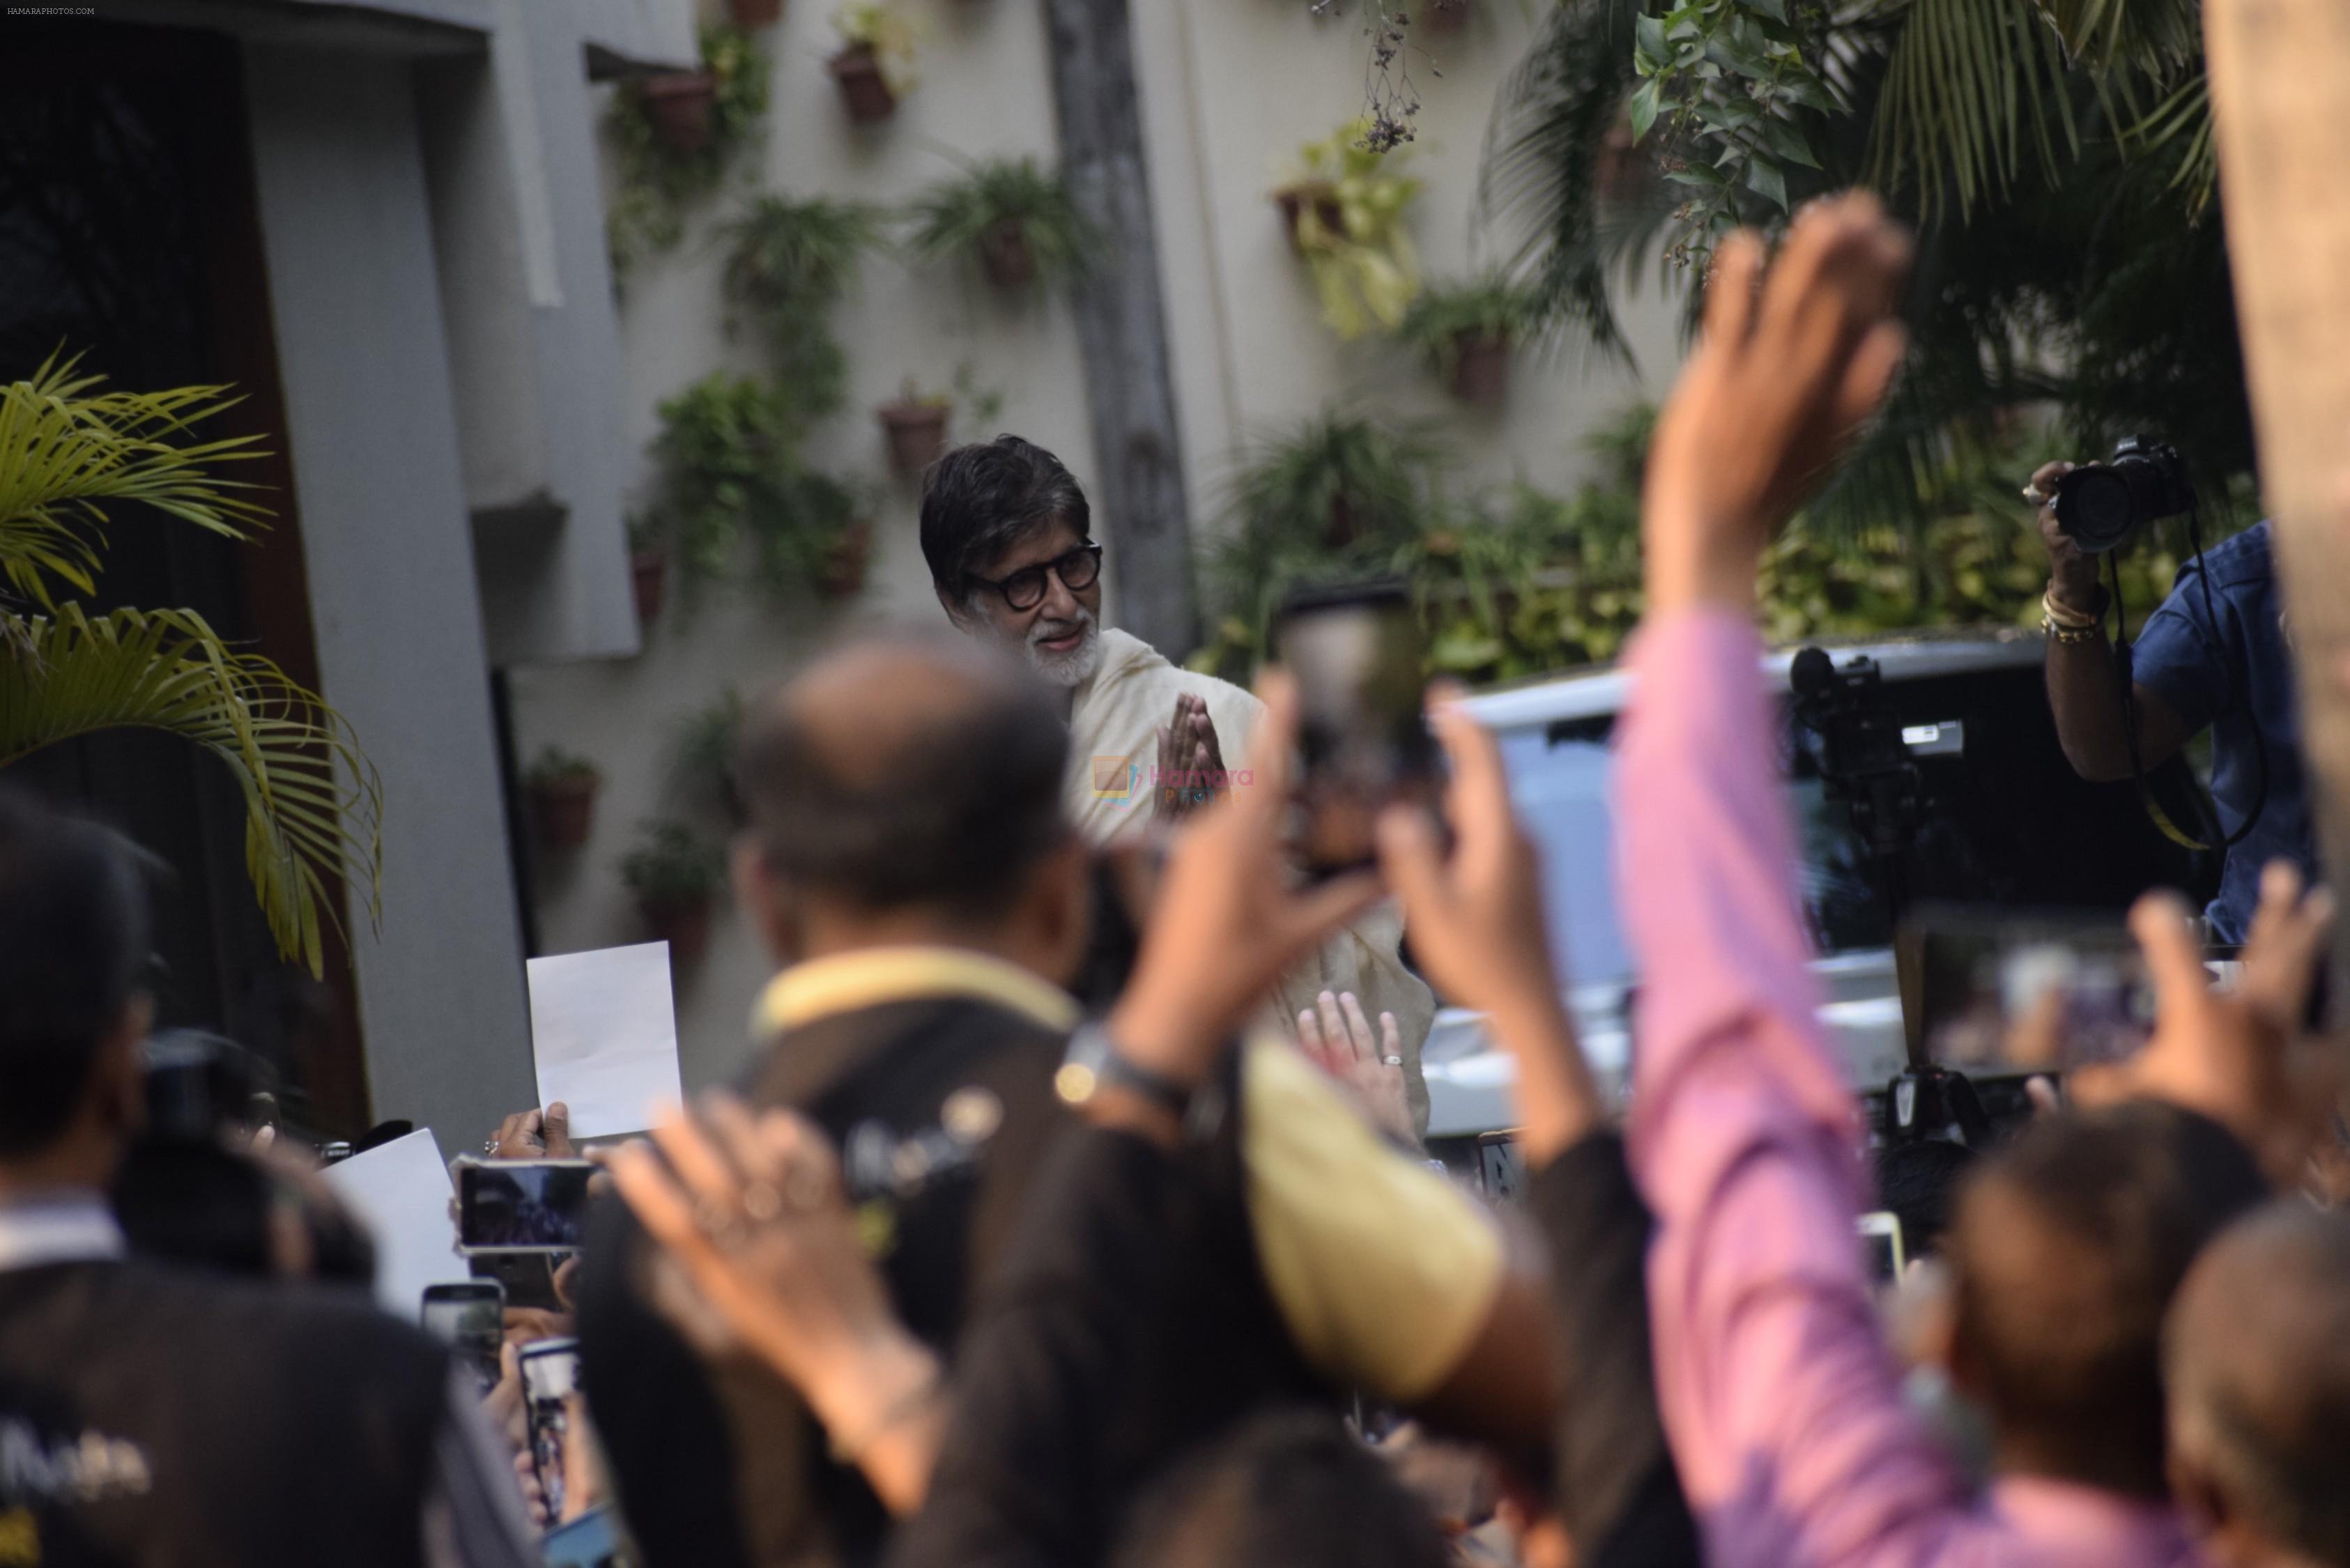 Amitabh Bachchan meets his fans outside his residence in juhu on 18th March 2019